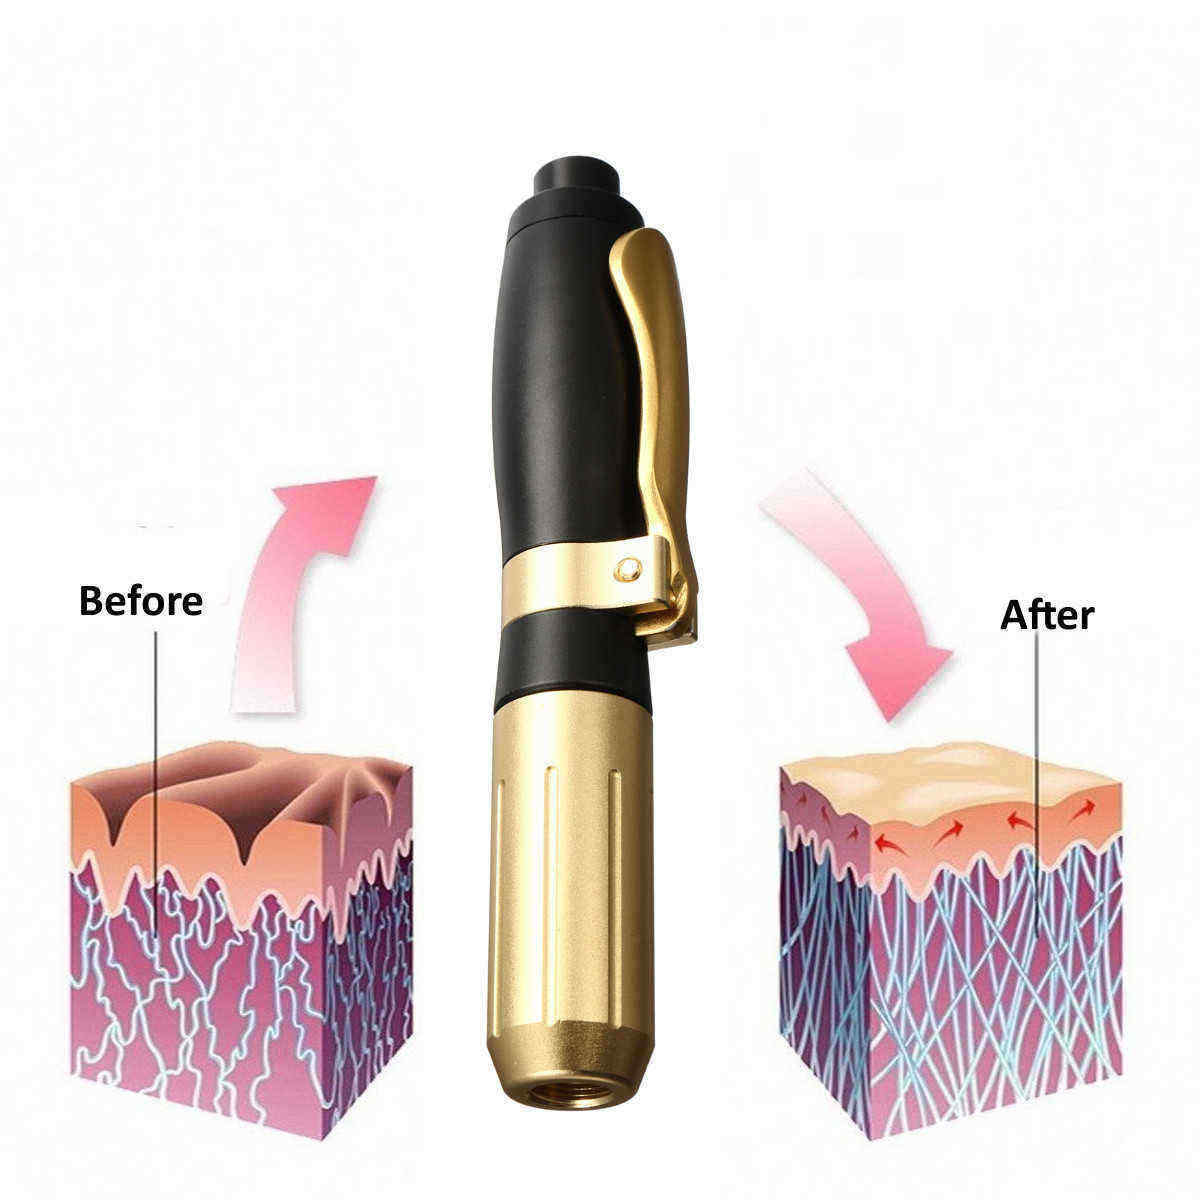 05ml-Hyaluron-Pen-Non-Invasive-Water-Syringe-Eye-Massager-Wand-Anti-Aging-Wrinkle-Removal-Lift-Injec-1520393